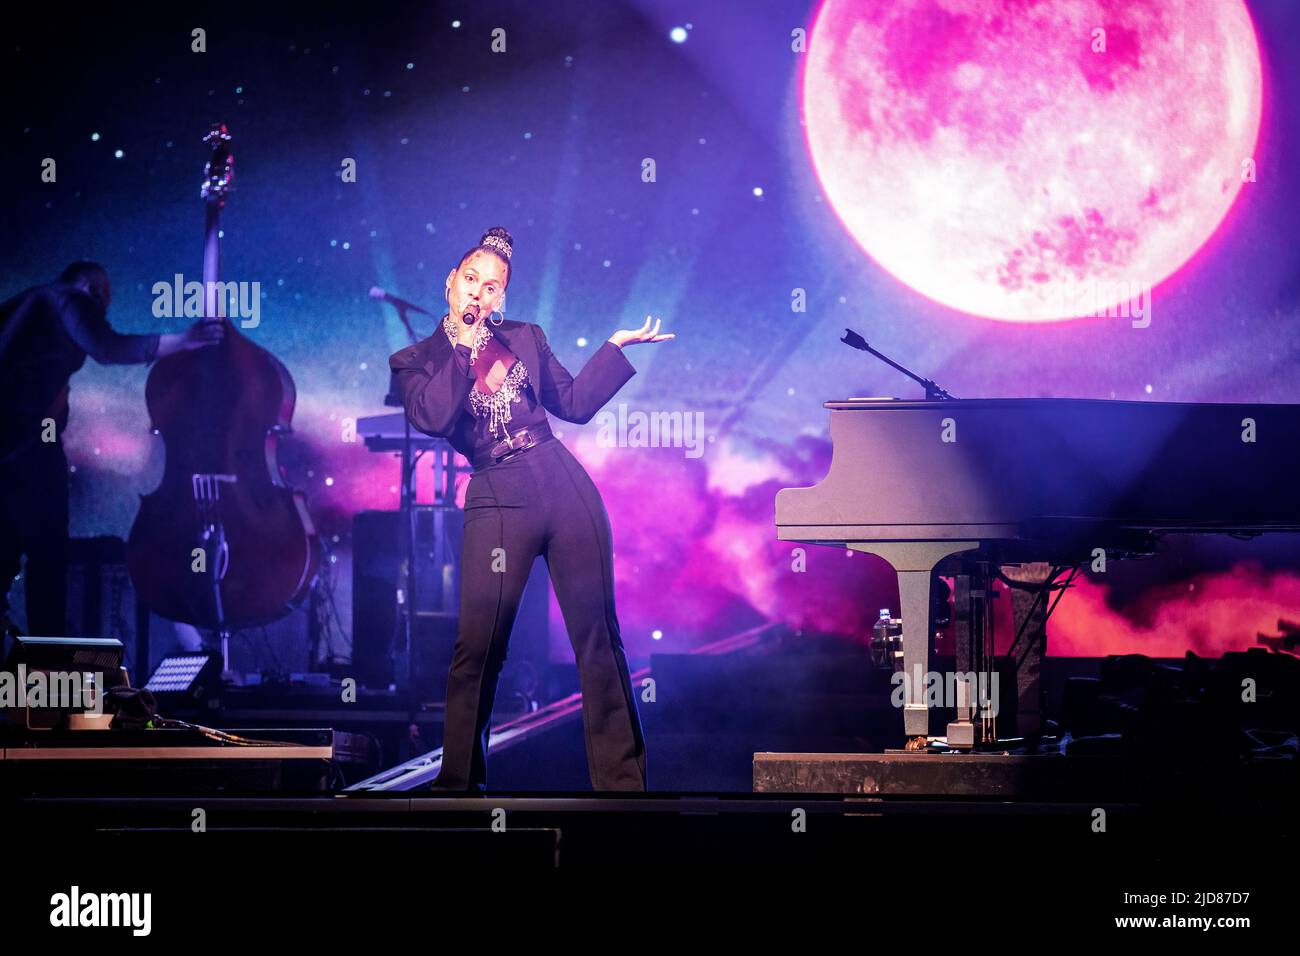 Oslo, Norway. 27th, June 2022. The American R&B singer, songwriter and musician Alicia Keys performs a live concert at Oslo Spektrum in Oslo. (Photo credit: Gonzales Photo - Terje Dokken). Stock Photo